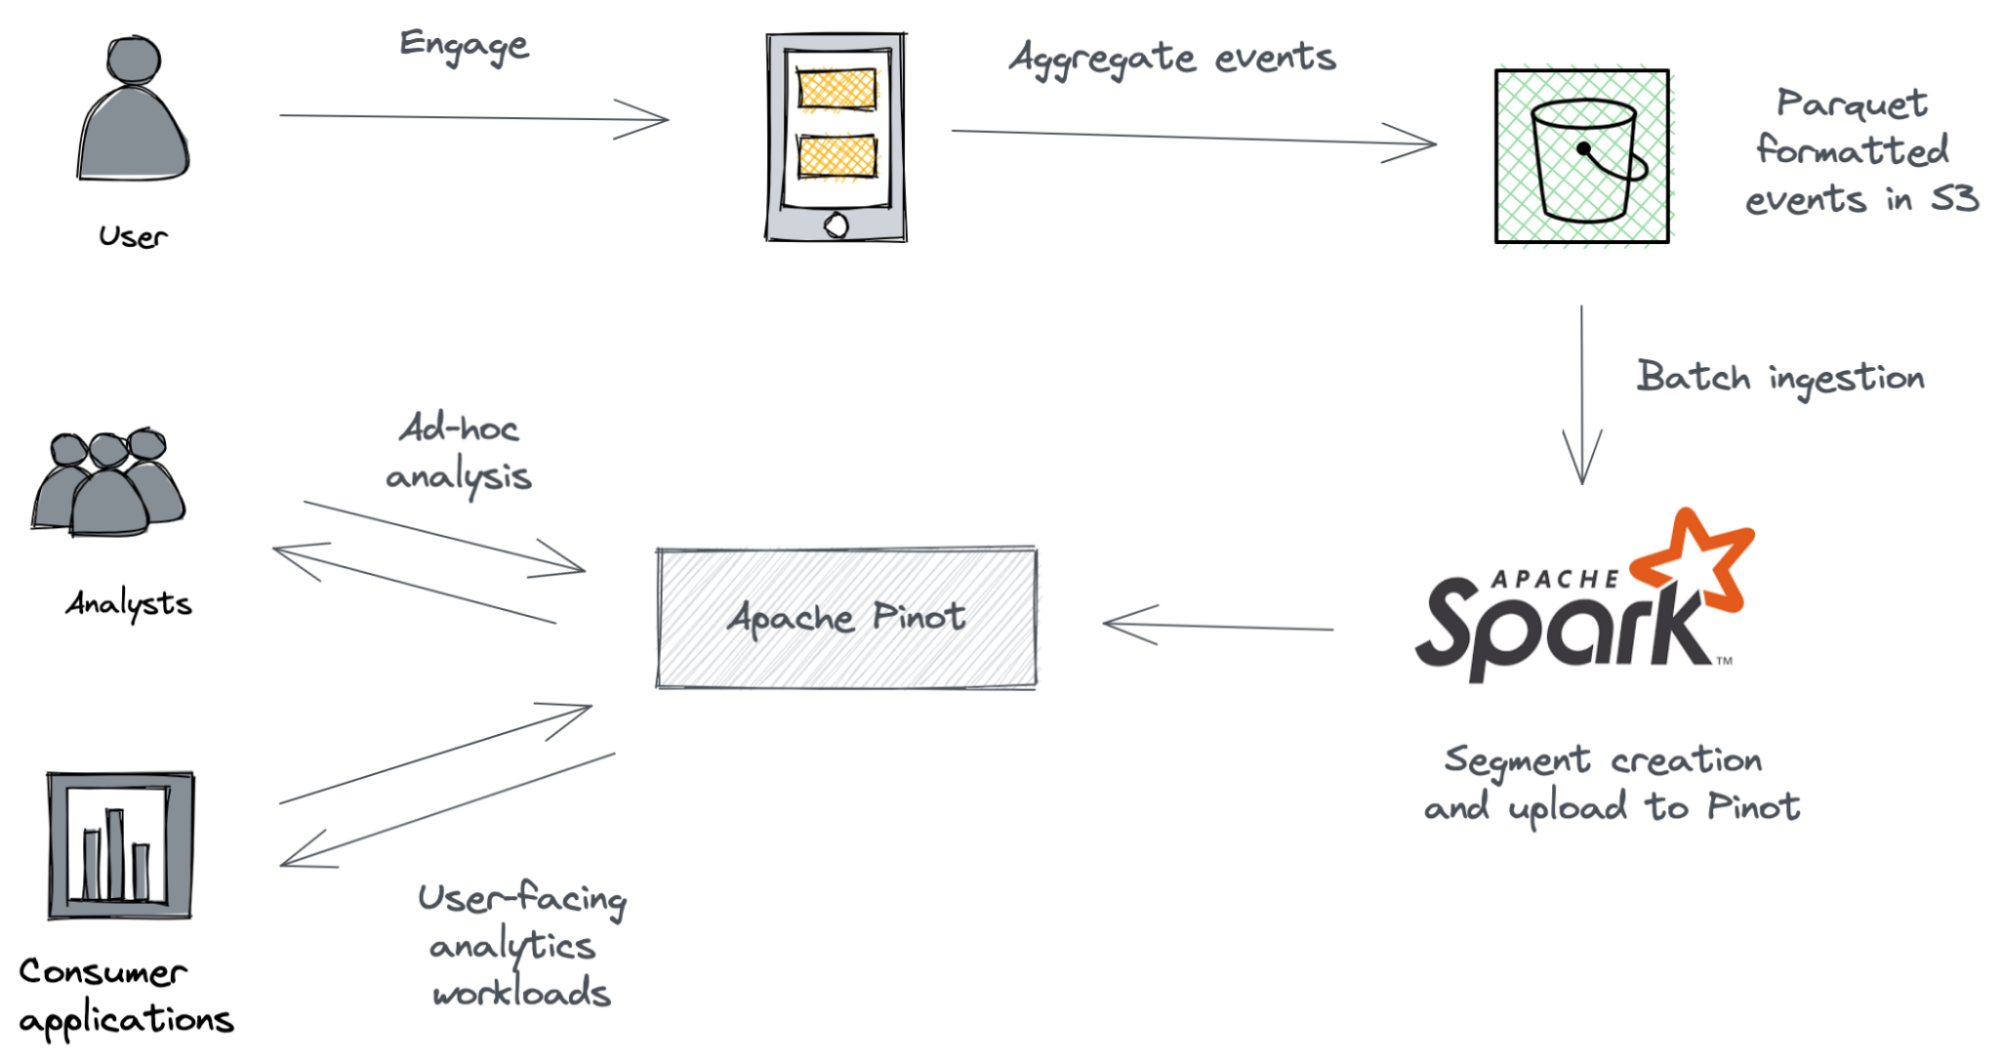 Sample user engagement application stats with Apache Spark and Apache Pinot